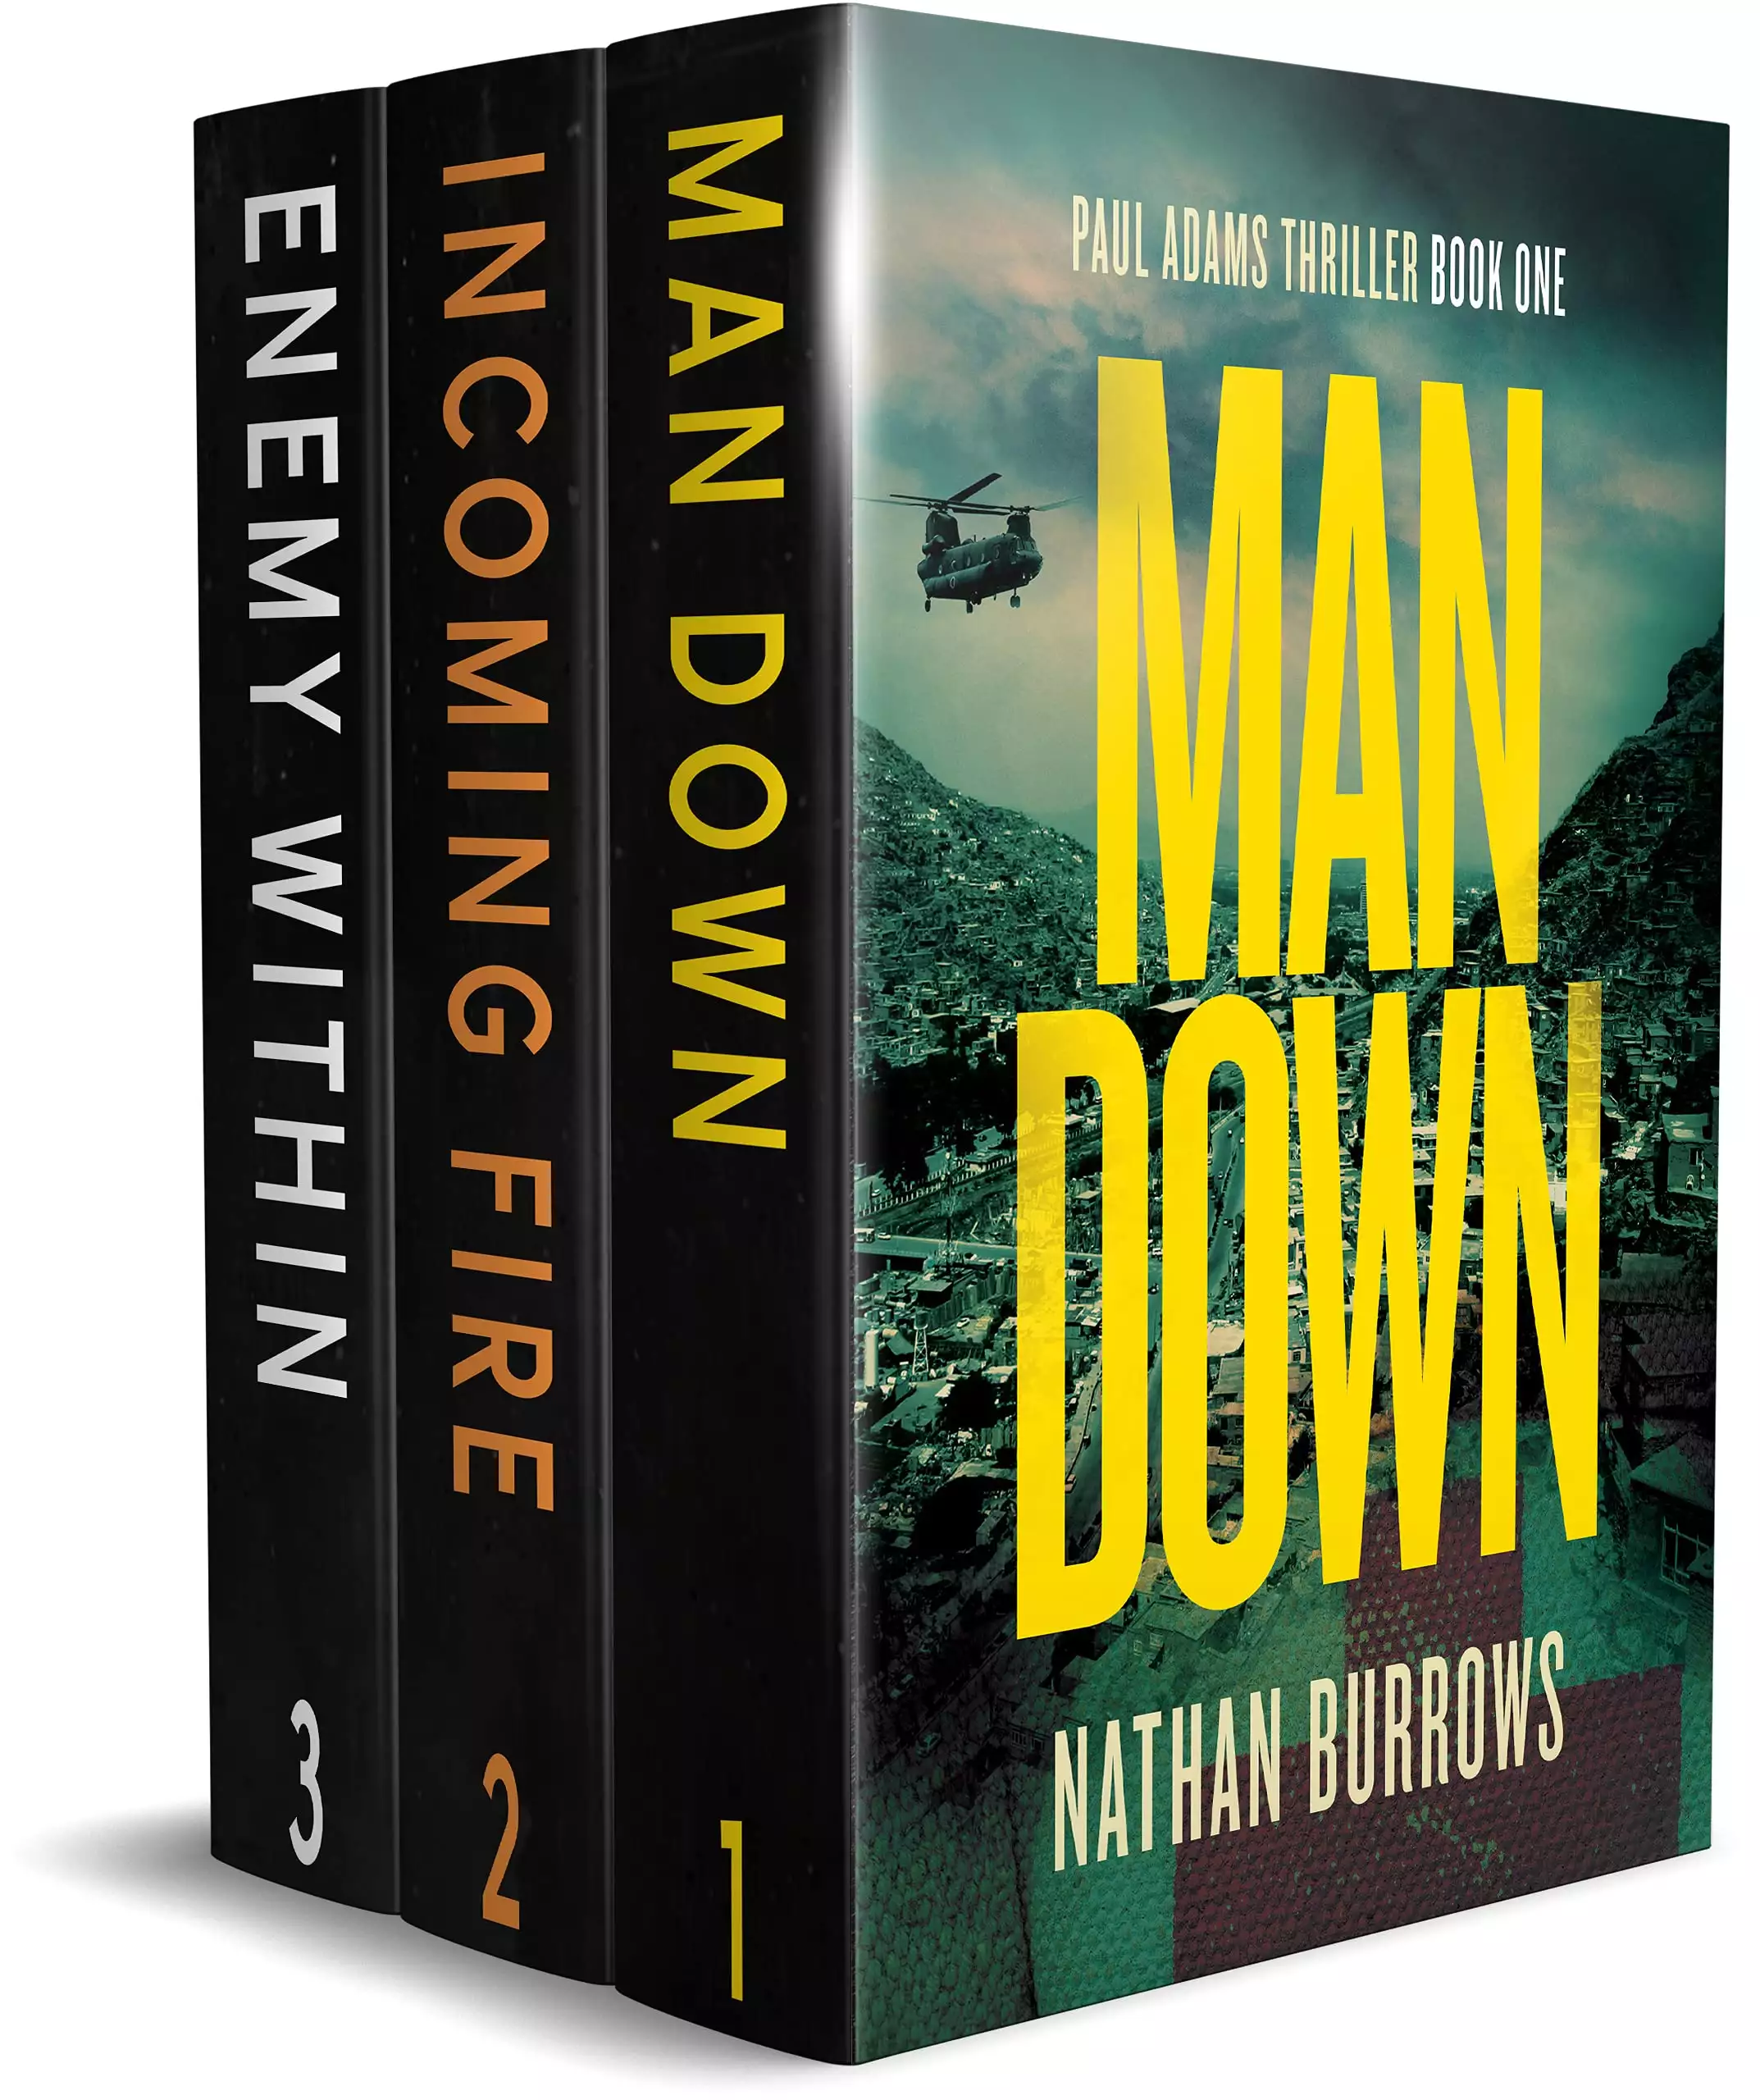 British Military Thriller Series (Books 1 to 3): Man Down, Incoming Fire, and Enemy Within in one eBook set